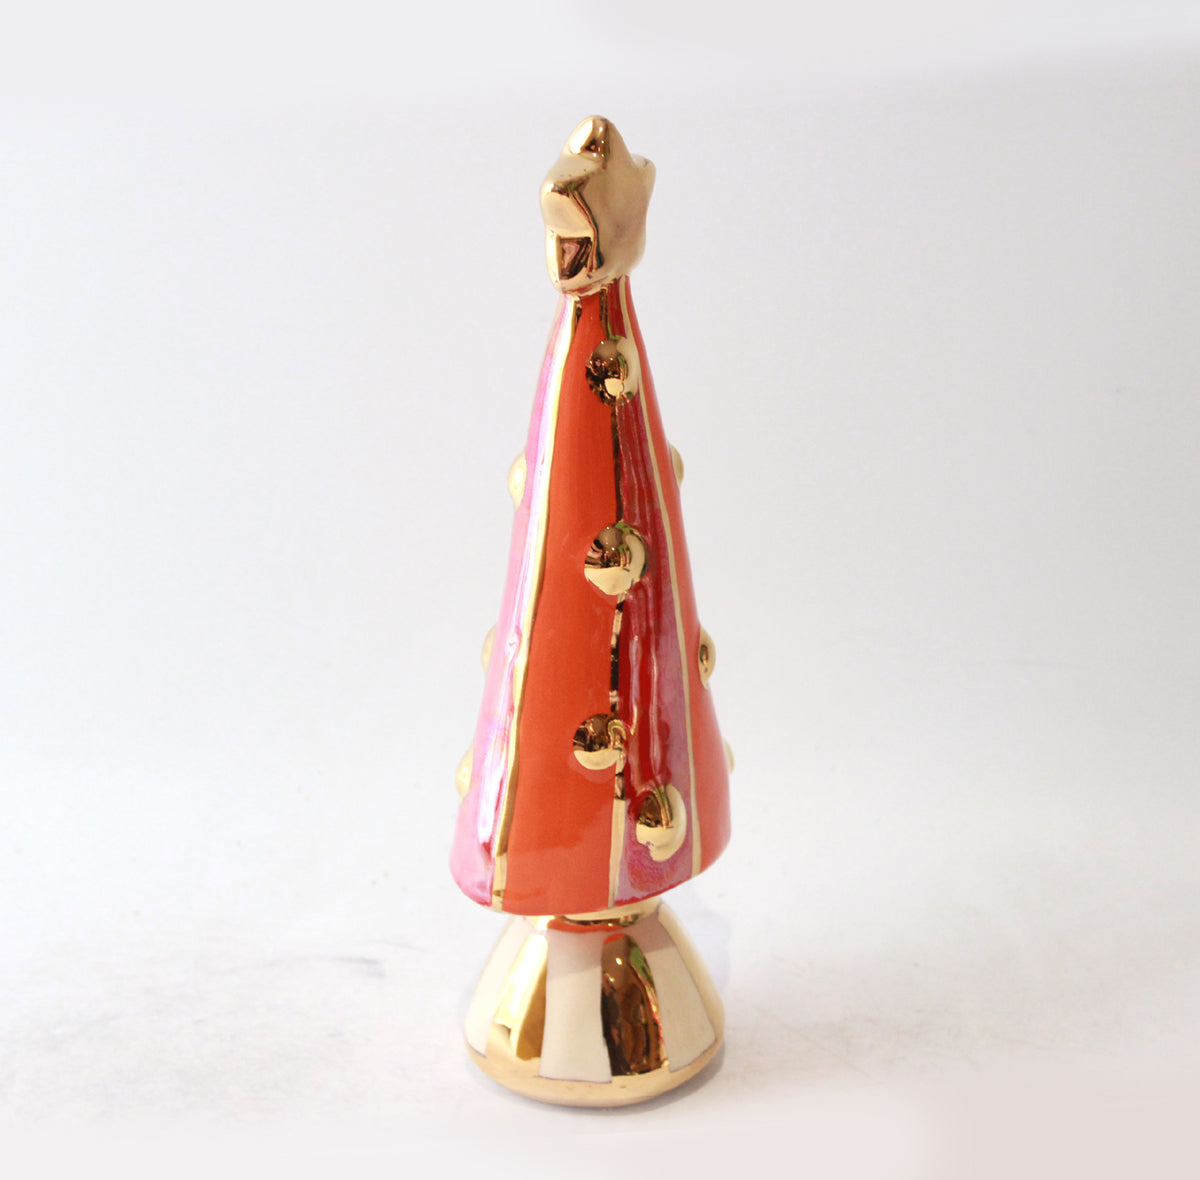 Small Christmas Tree in Orange and Red Stripe with Gold and White Striped Base